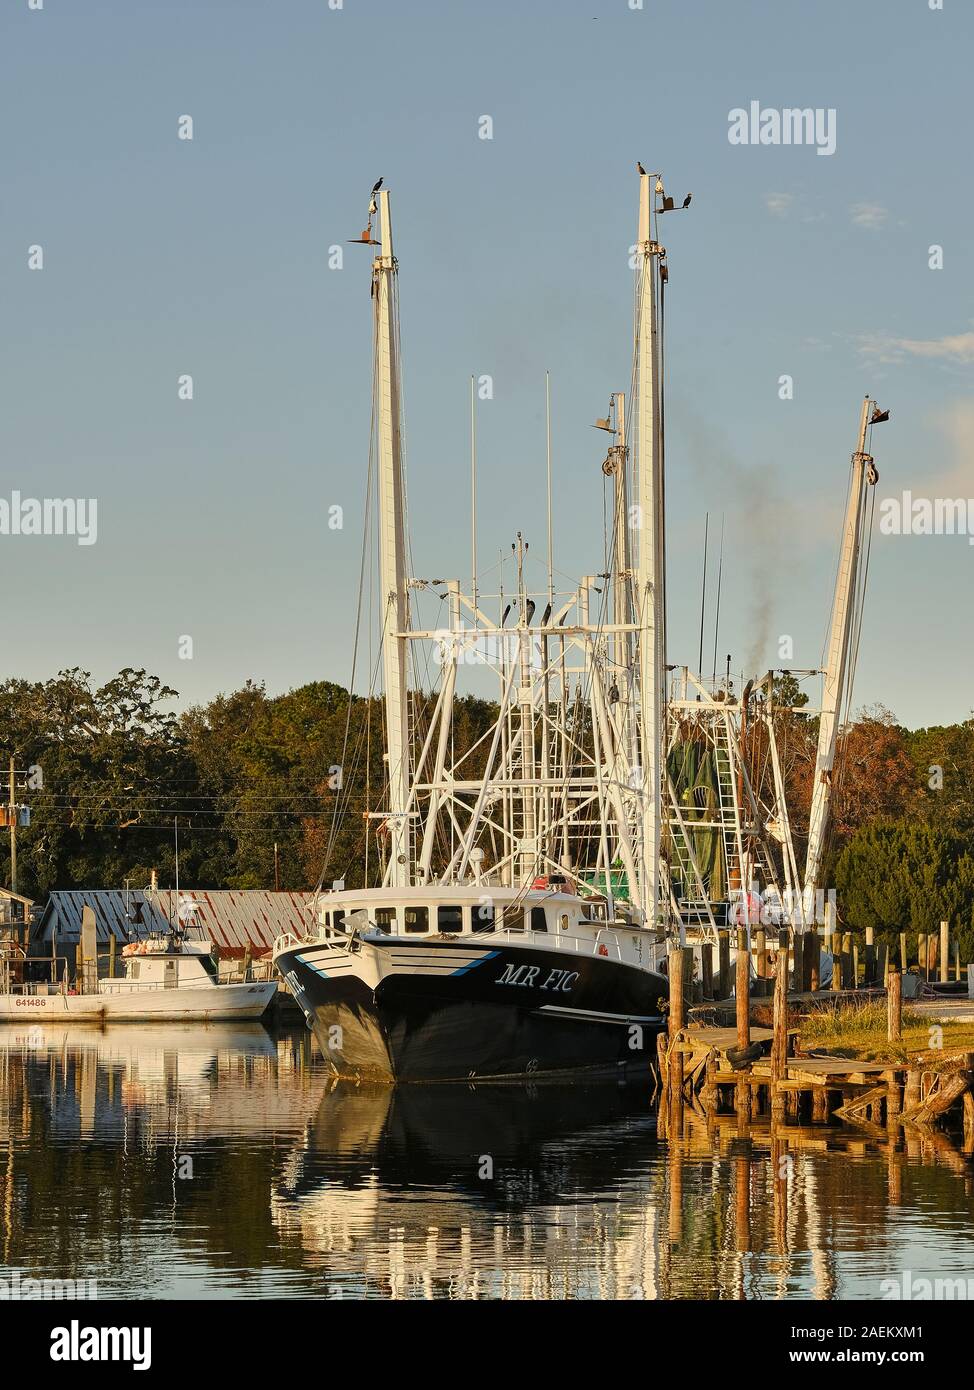 Commercial fishing boats and shrimp boats tied up, part of the fishing fleet, in Bayou La Batre Alabama, USA. Stock Photo